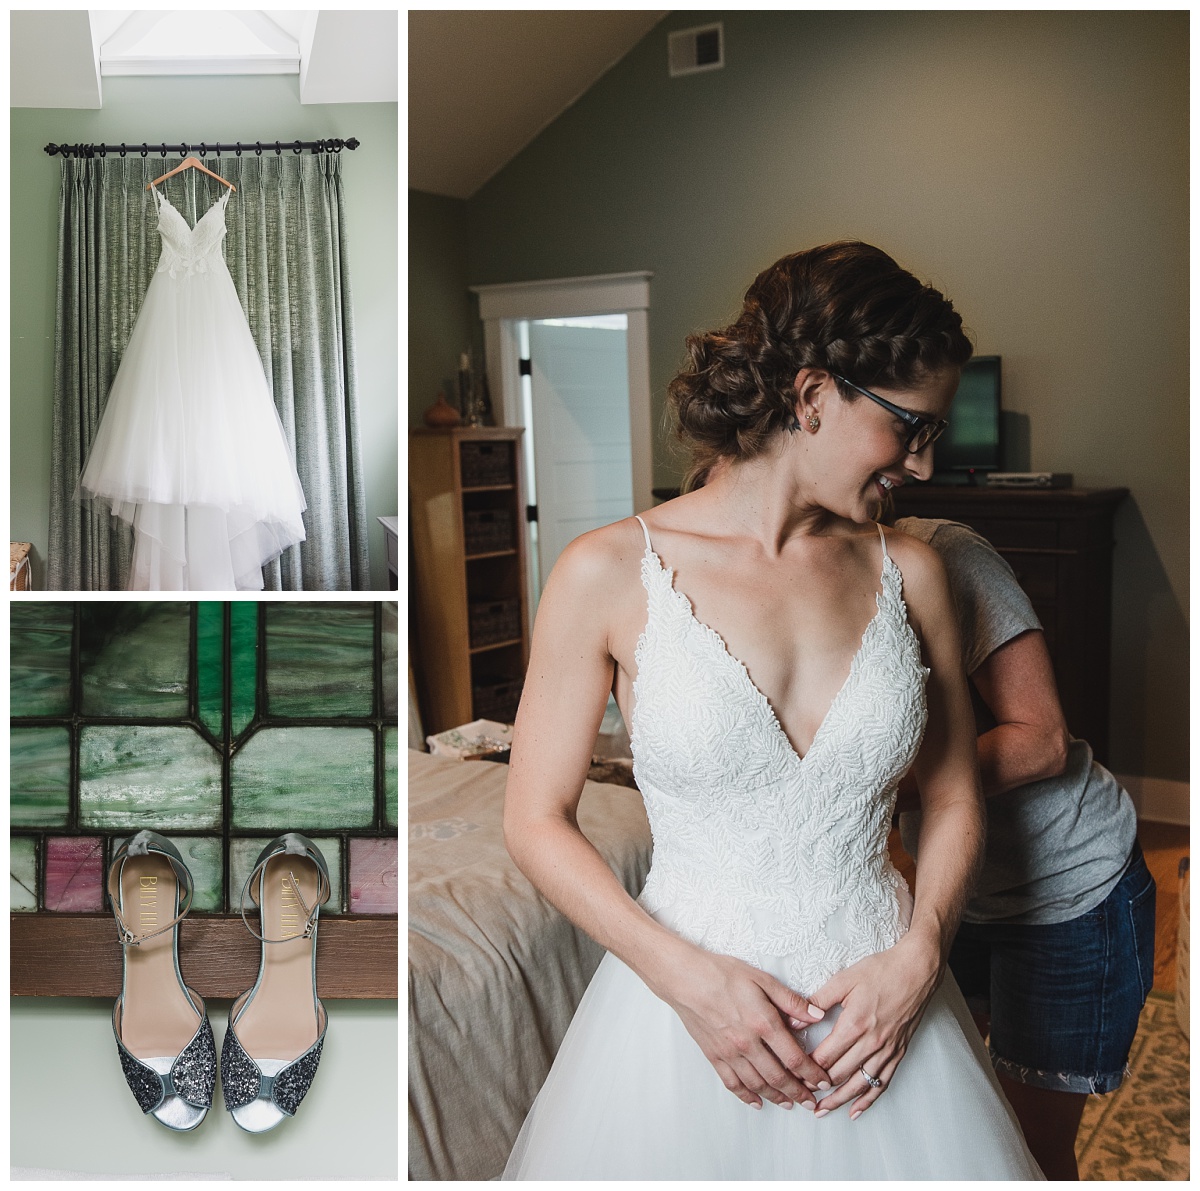 top left: White wedding dress with full tulle skirt hanging in front of a window | Lower left: Grey sparkly peep-toe sandals with ankle strap hanging from a stained glass window with tones of green and purple. | Right: Dark-haired bride in glasses being zipped into her wedding gown.